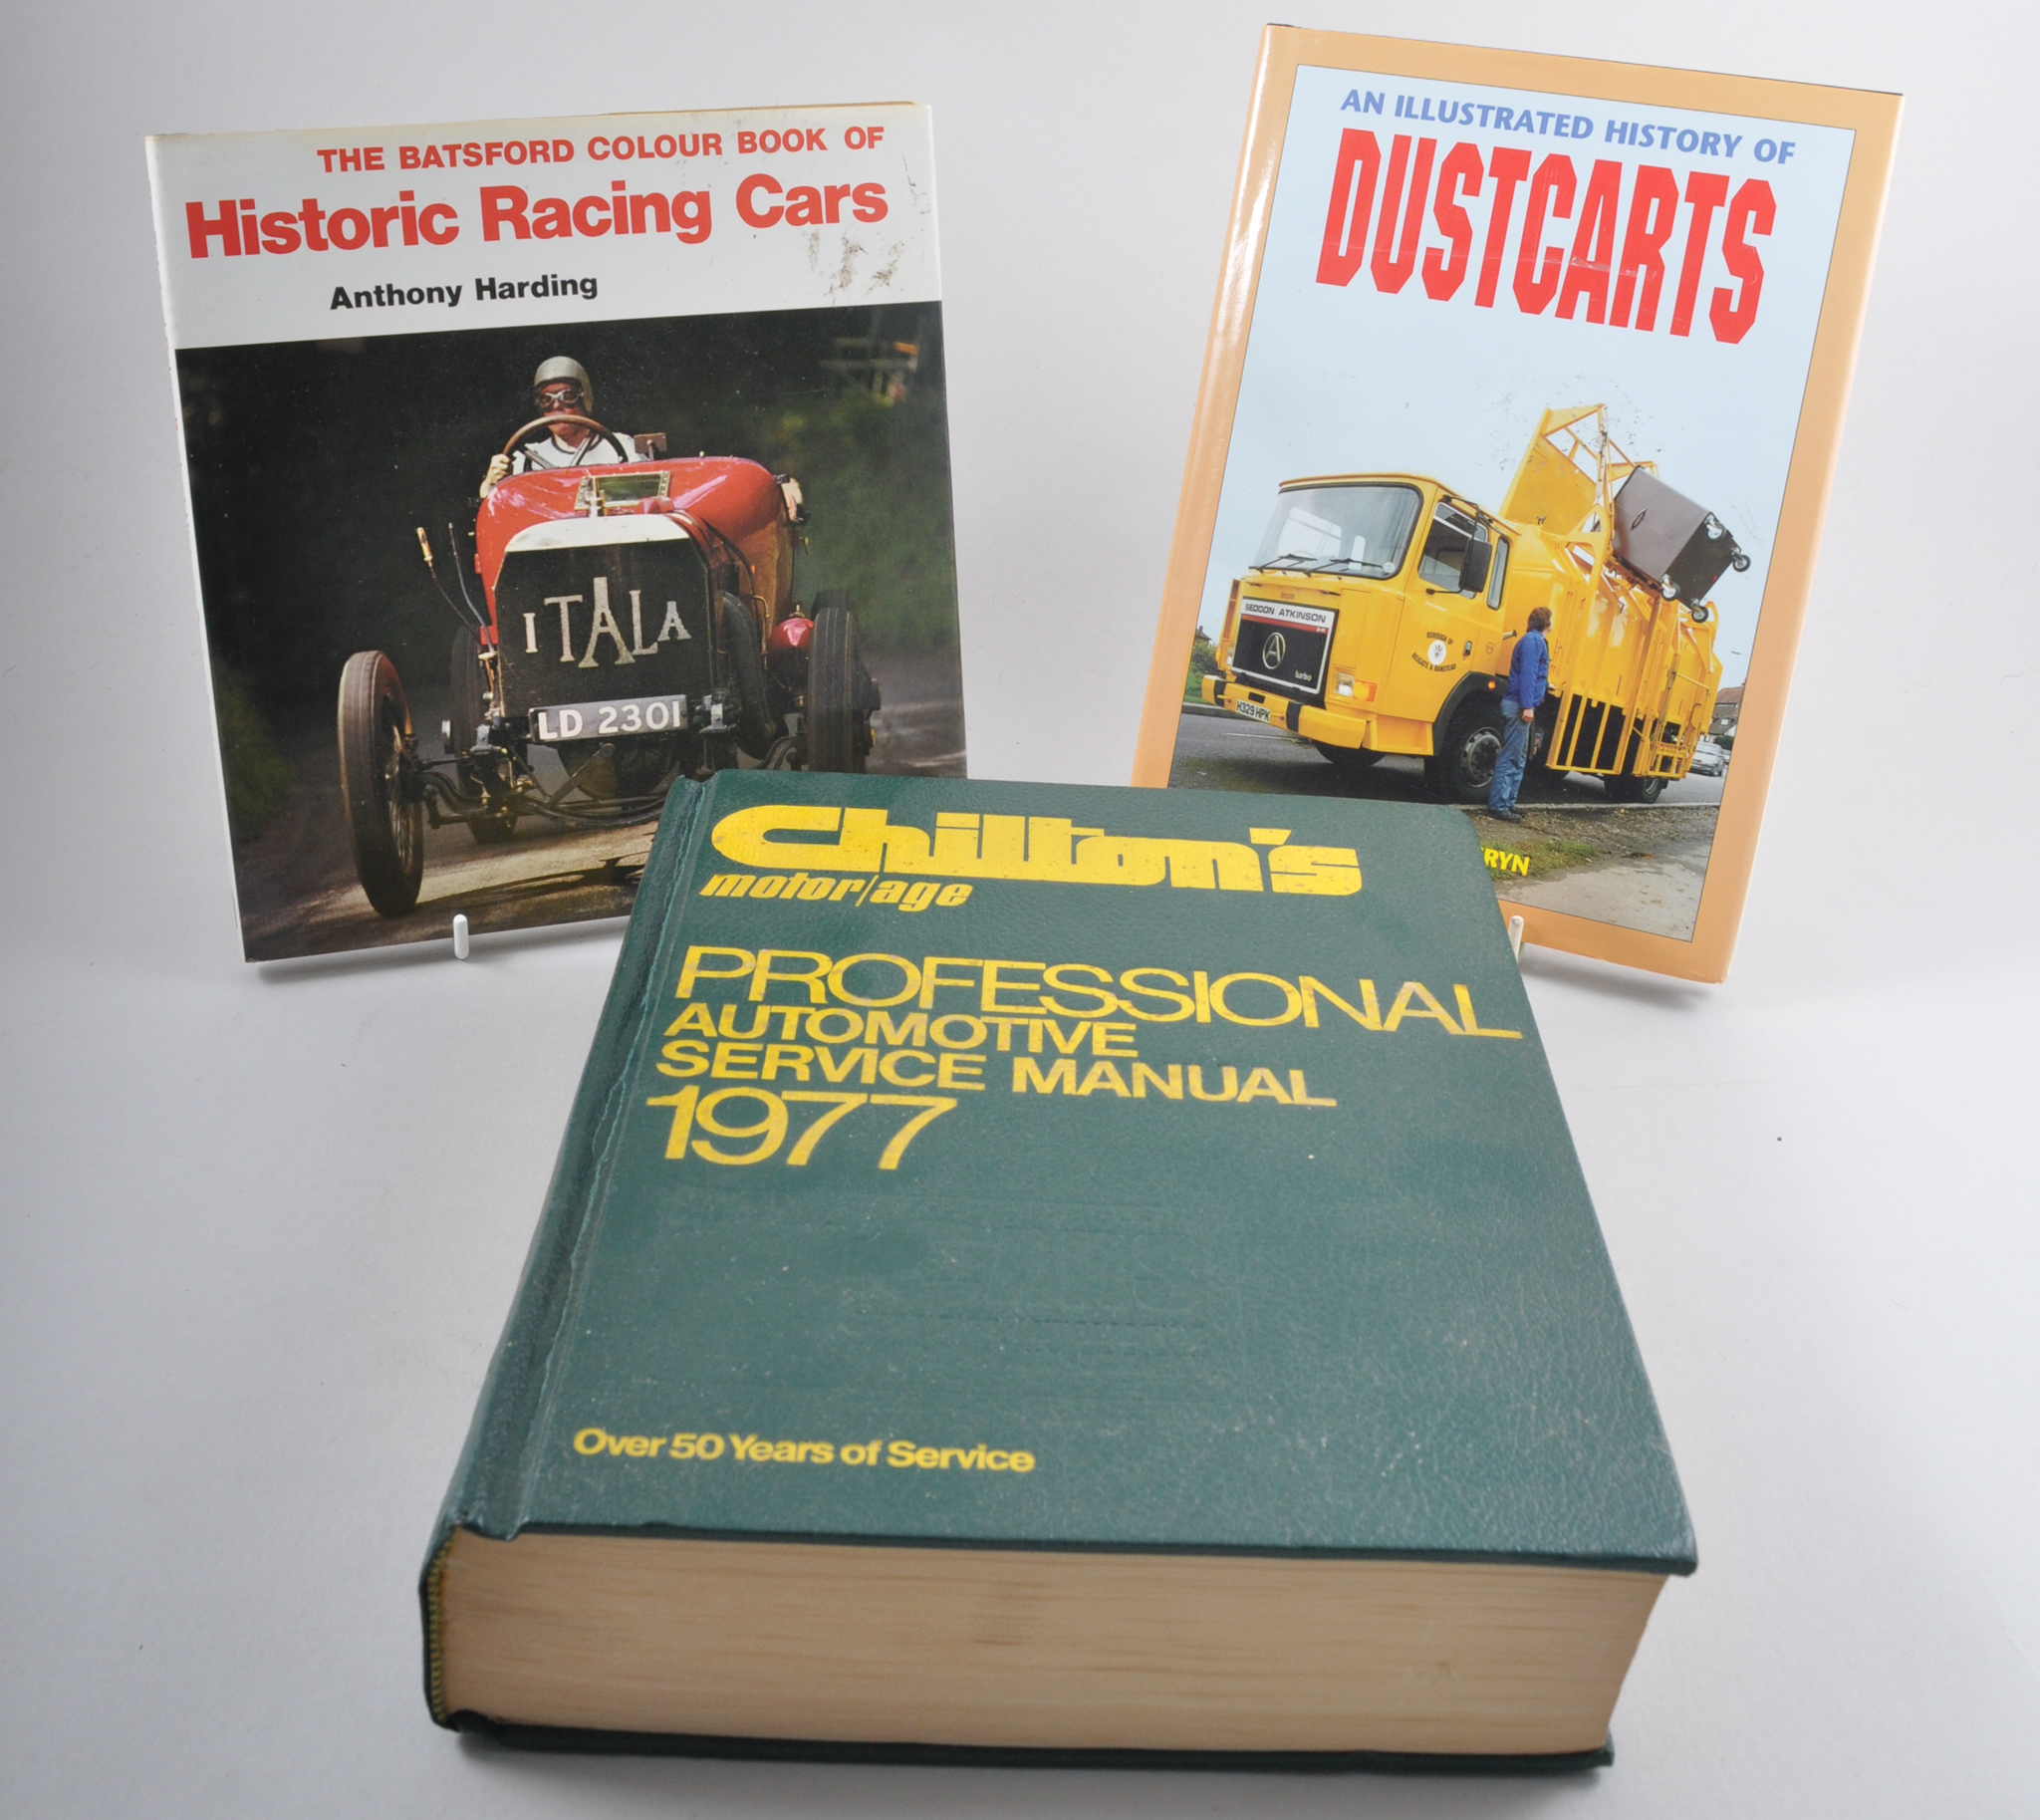 Motor car repair books and other books relating to cars. (quantity in two boxes).